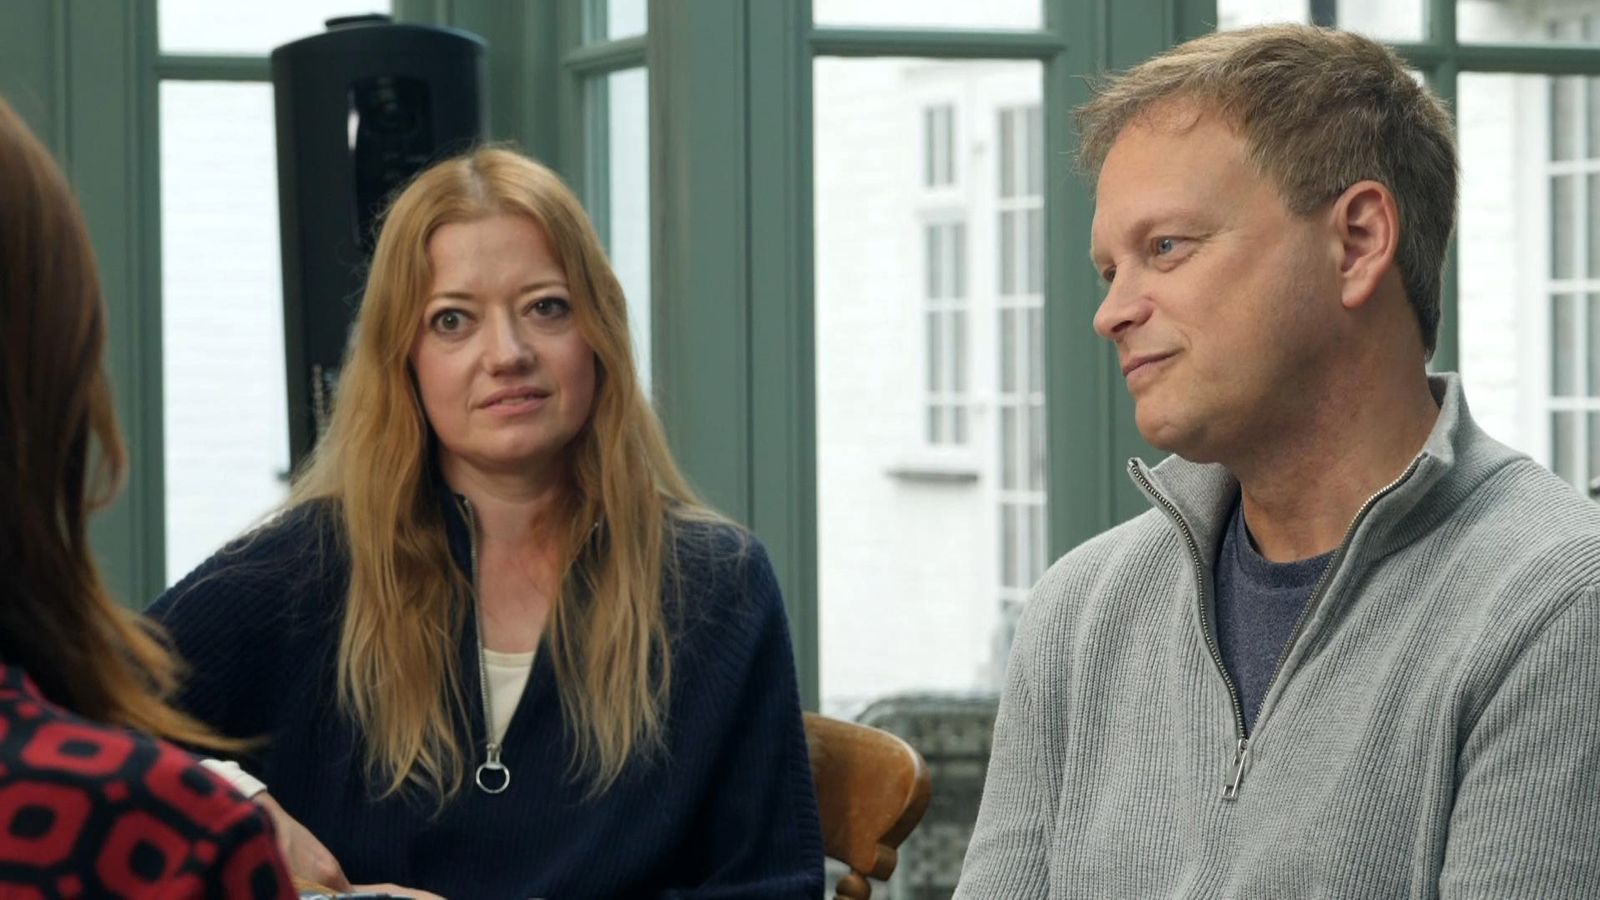 'We have a lot in common': Grant Shapps and Ukrainian refugee family describe living together